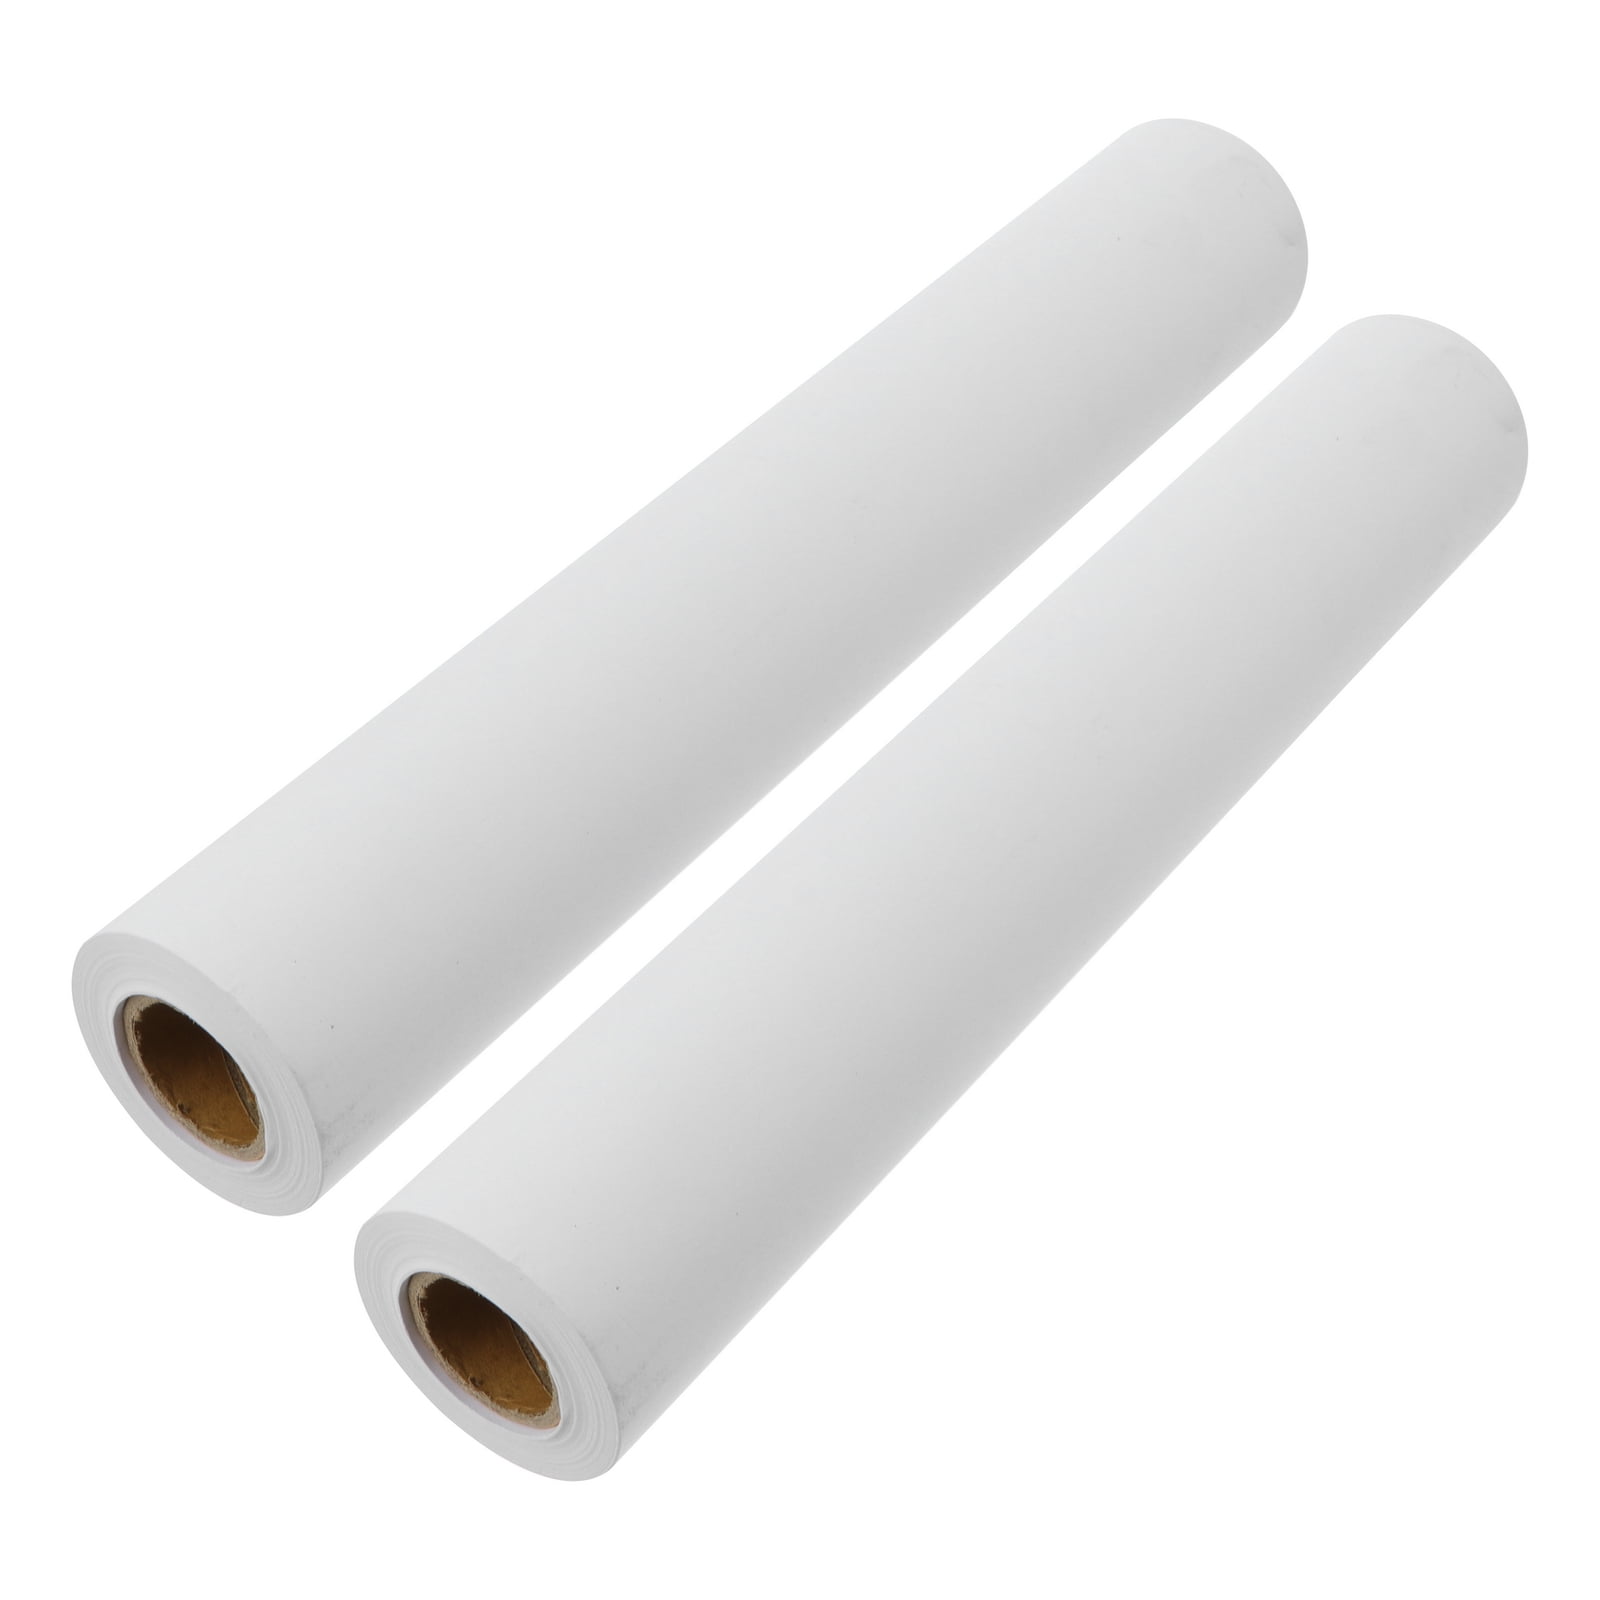 2 Rolls White Arts and Crafts Paper Rolls Fadeless Bulletin Board